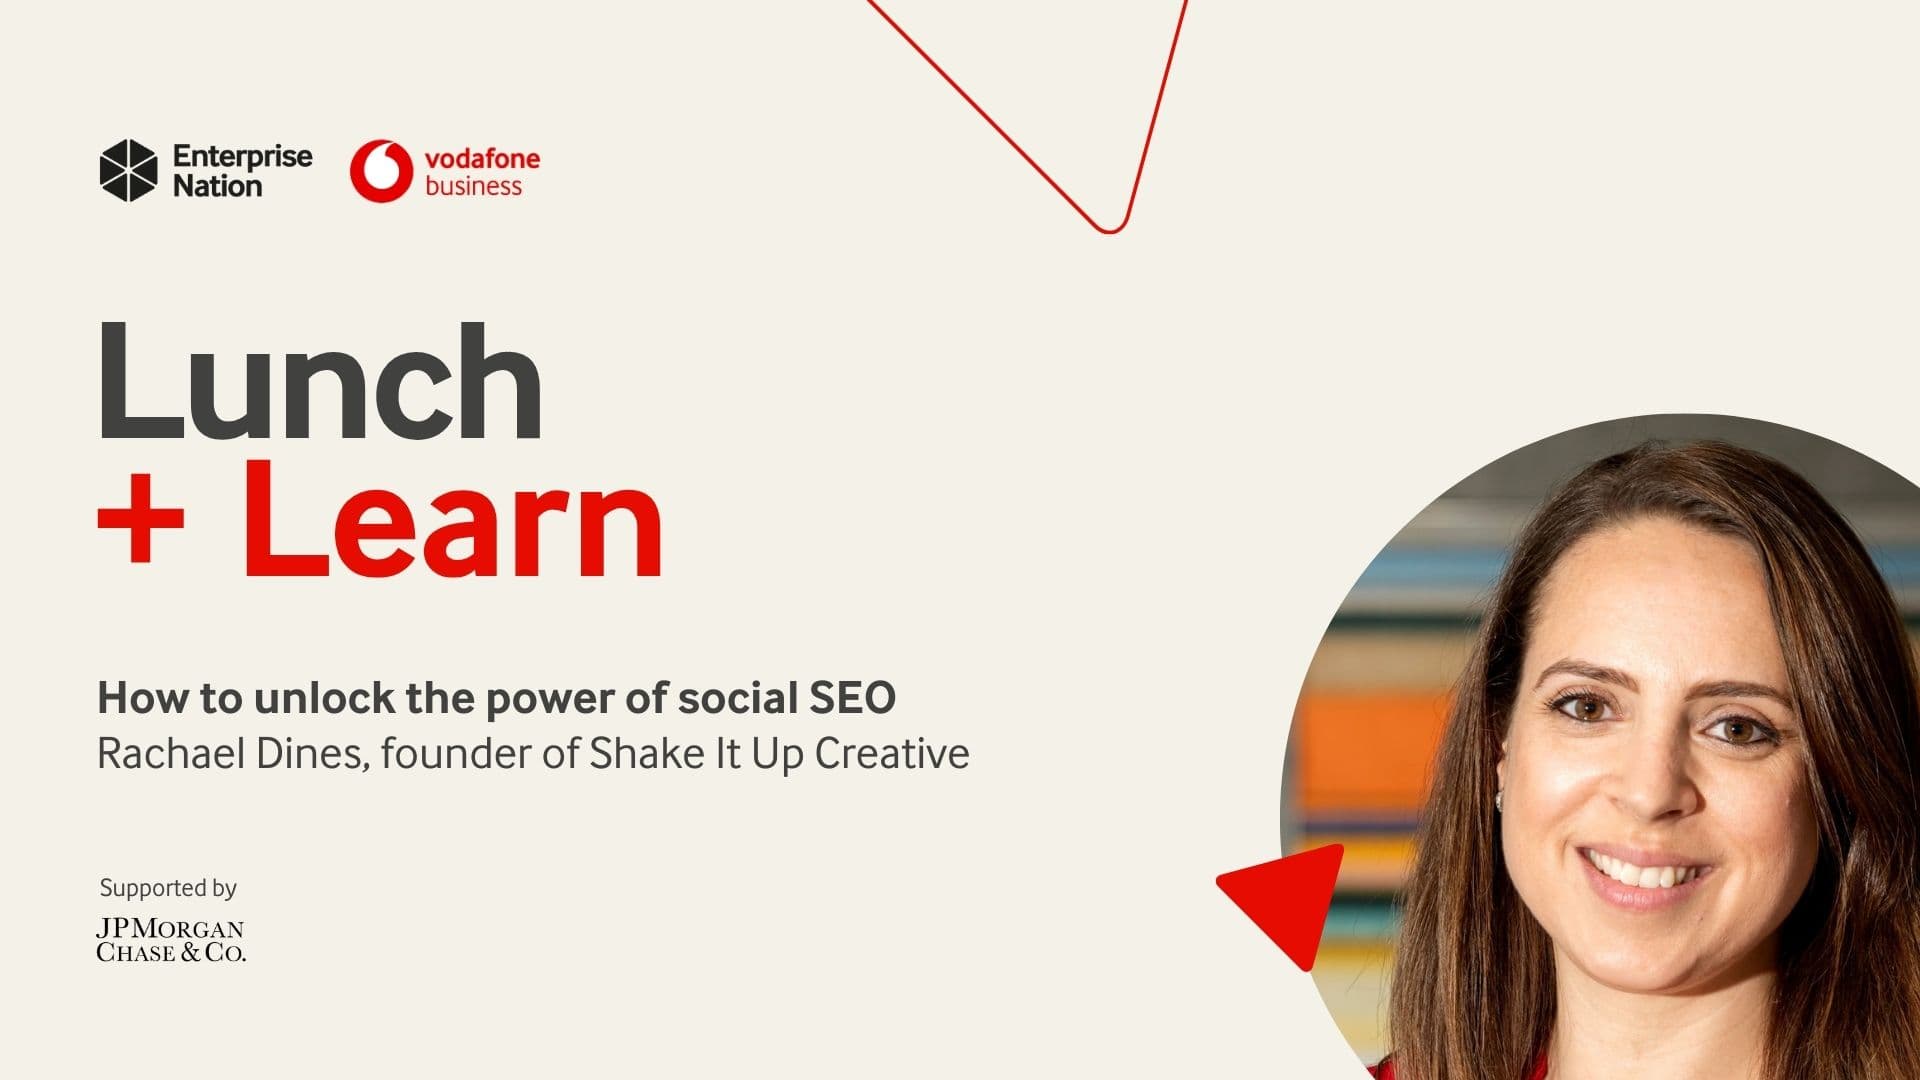 Lunch and Learn: How to unlock the power of social SEO